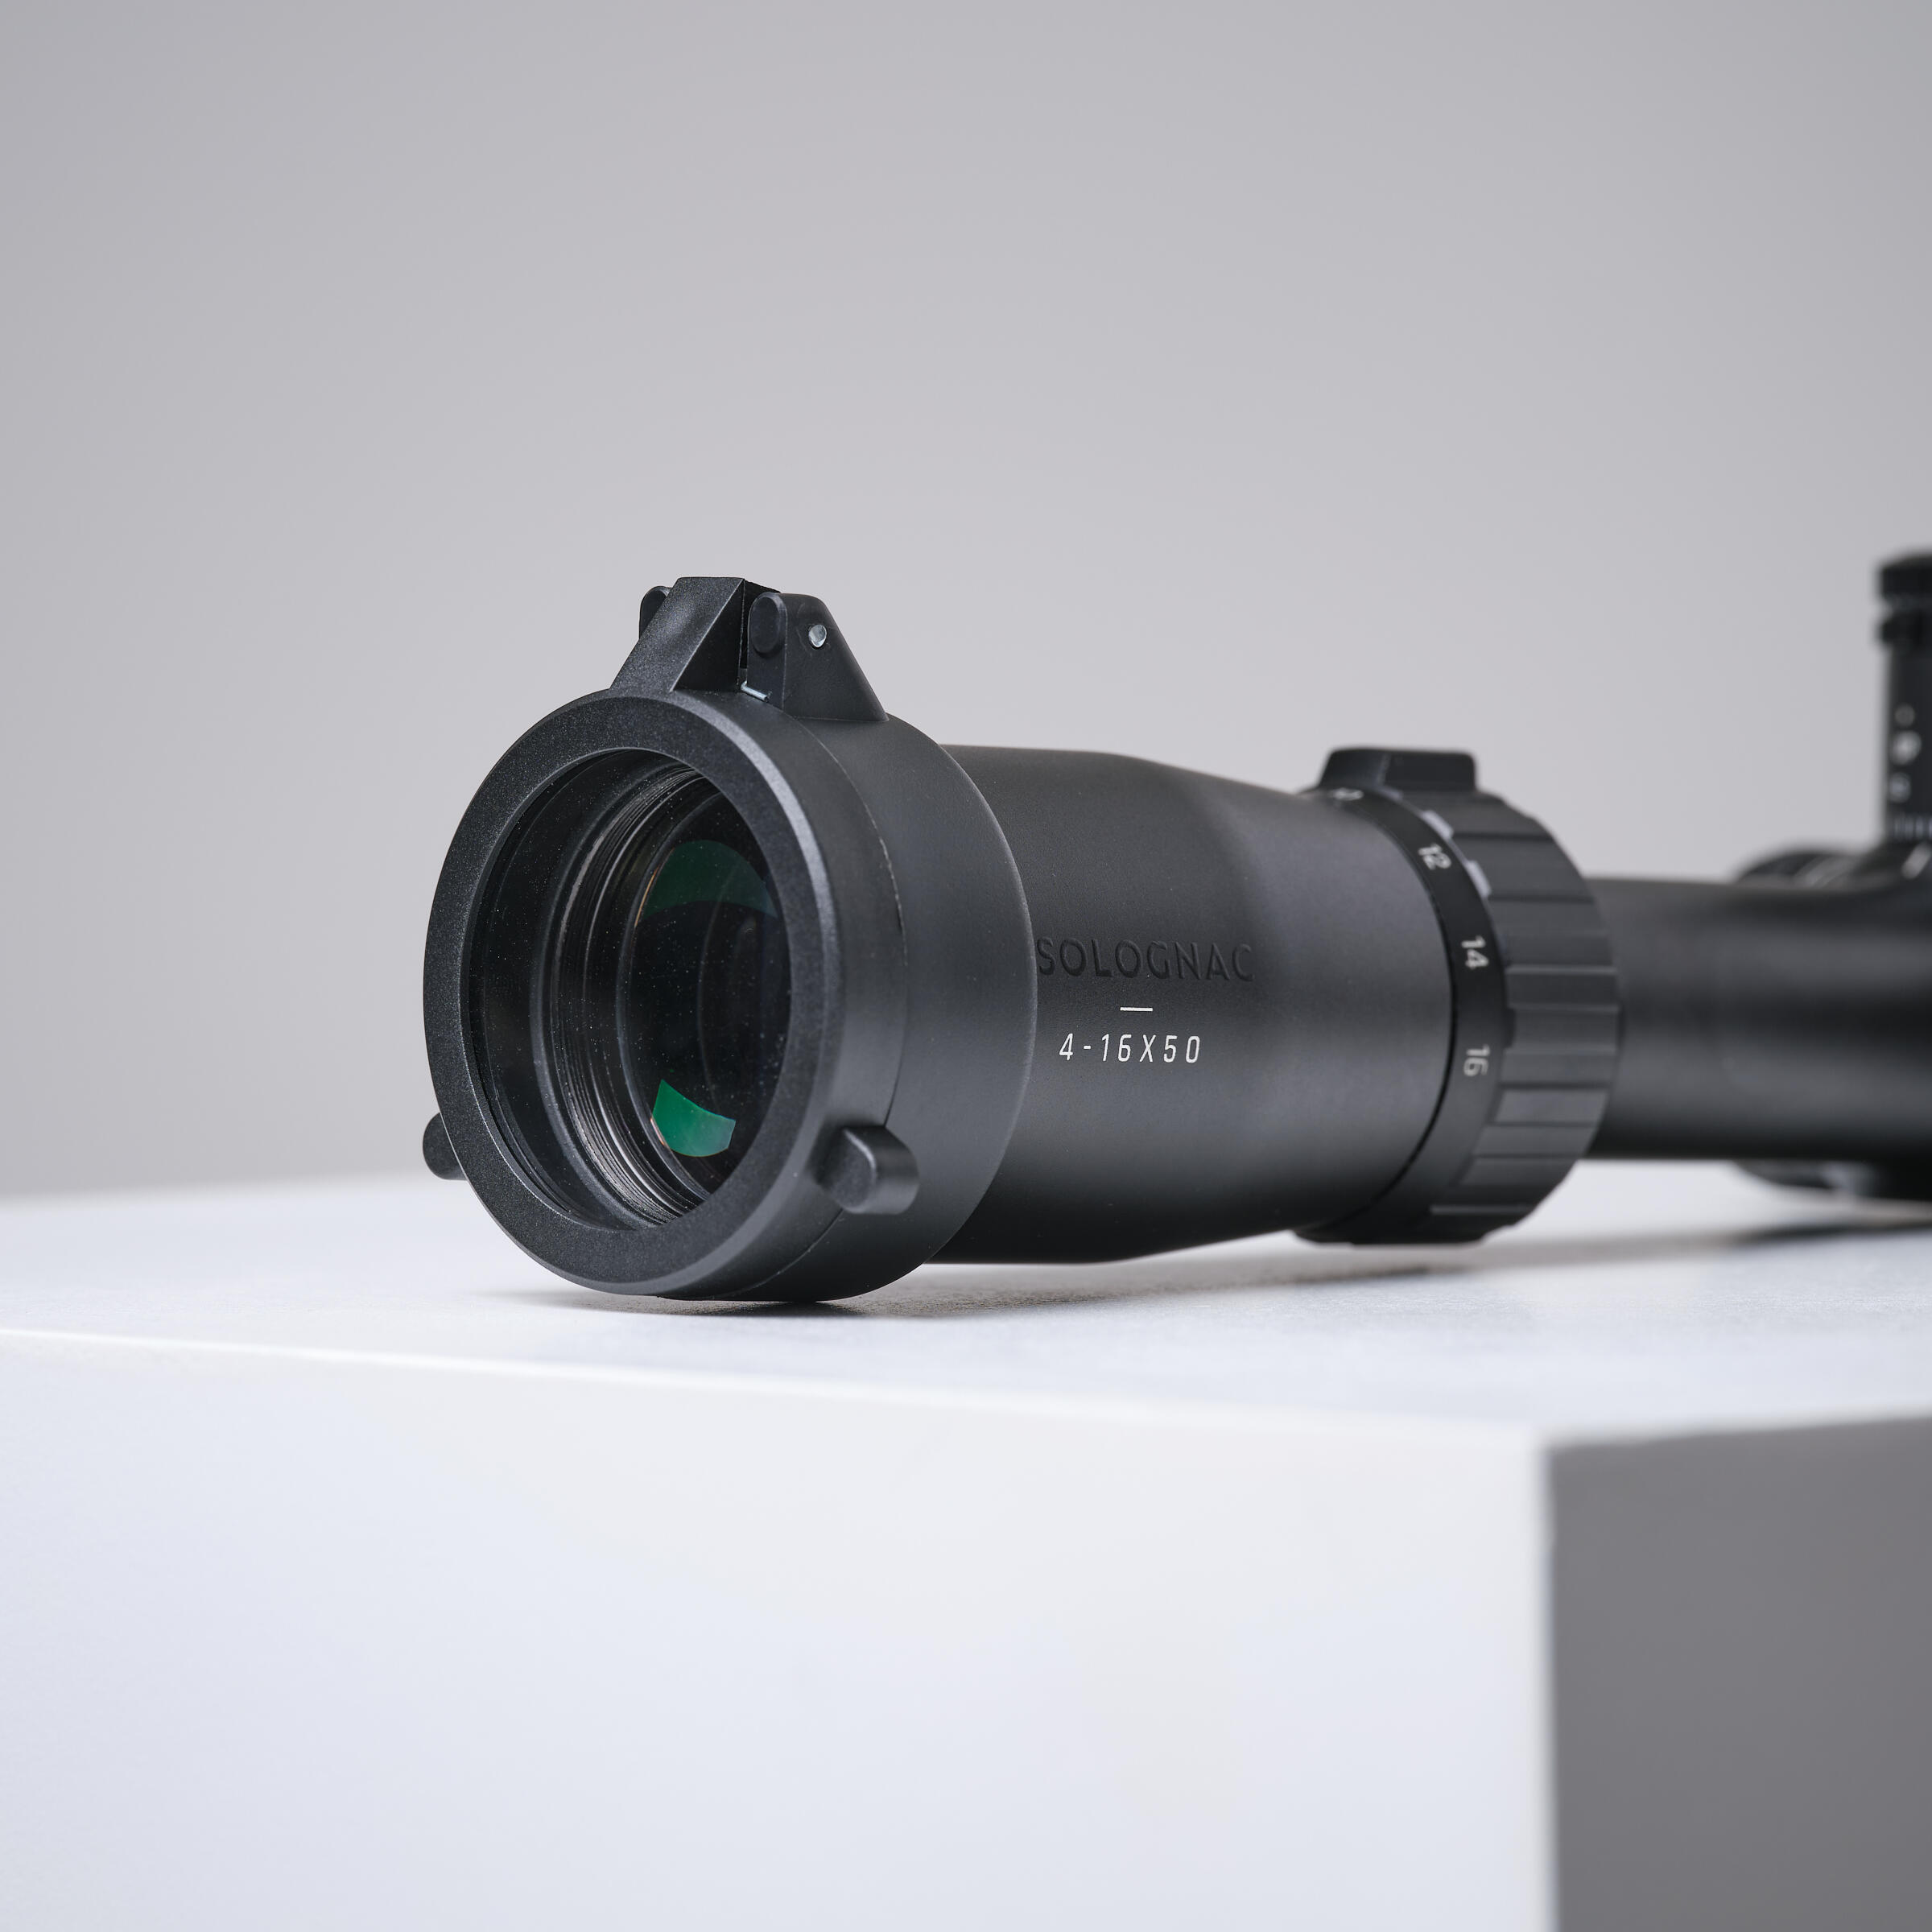 SCOPE 4-16X50 with adjustable parallax 6/11